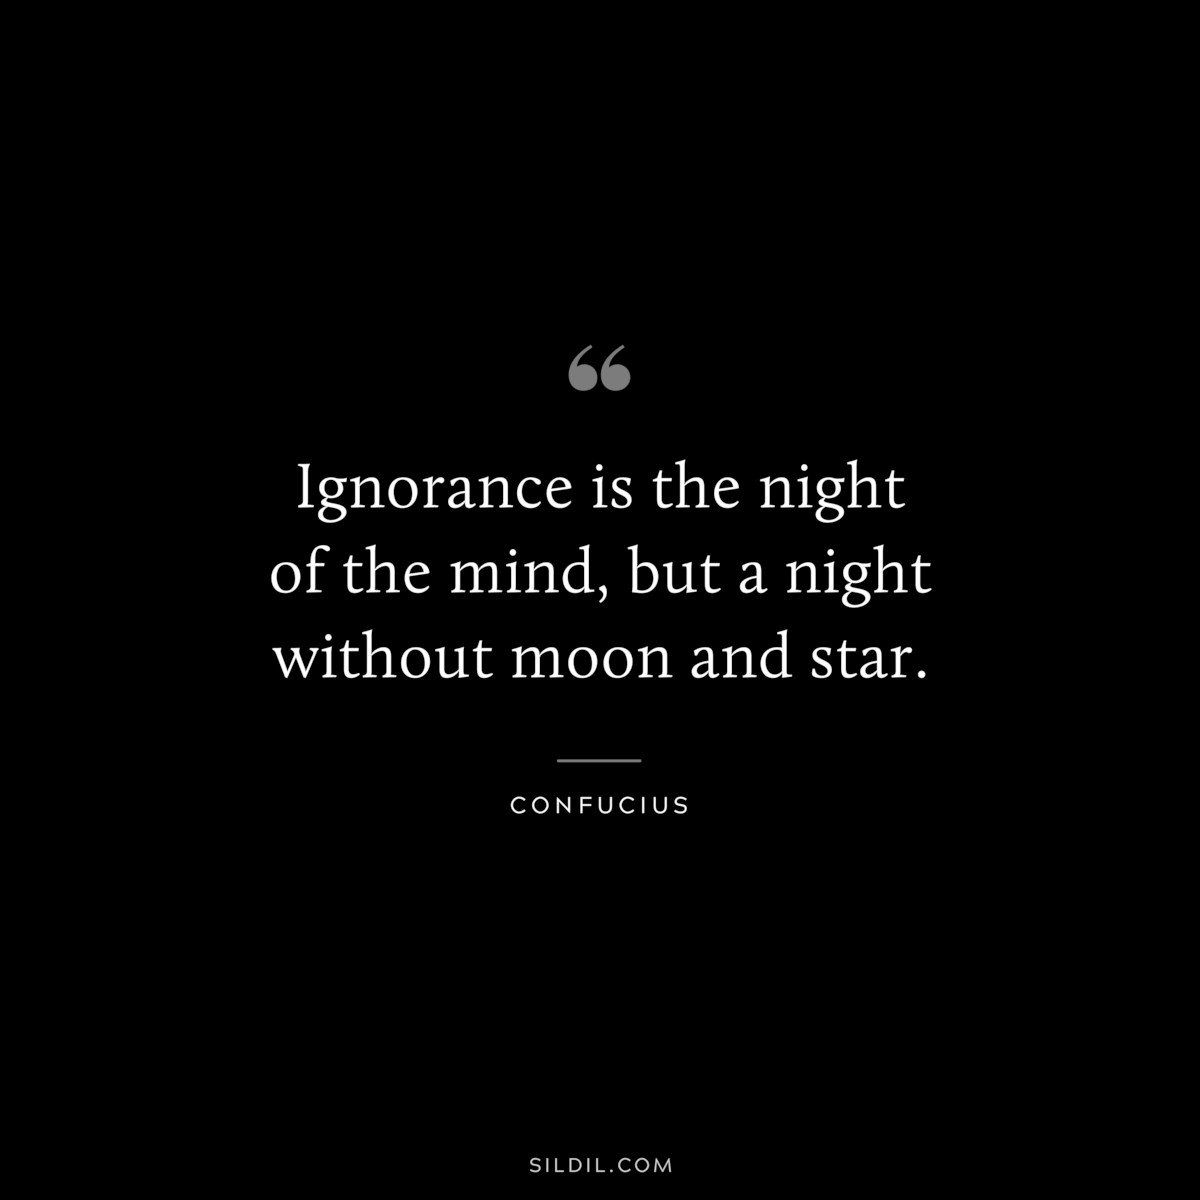 Ignorance is the night of the mind, but a night without moon and star. ― Confucius